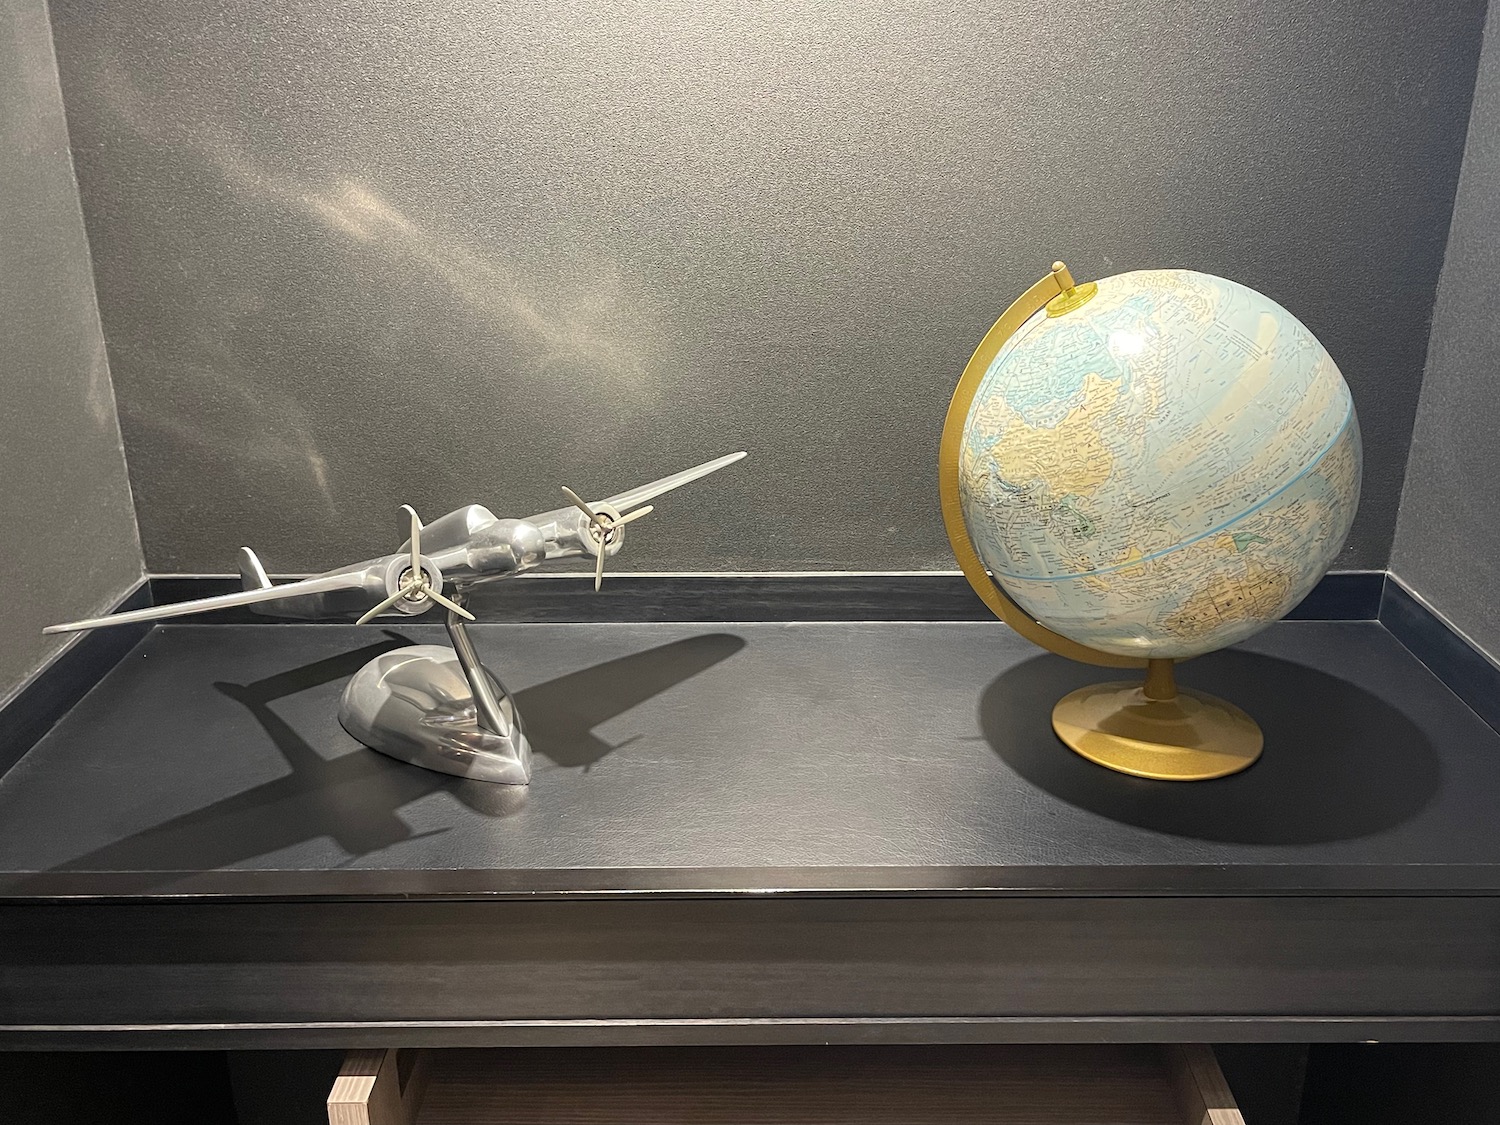 a model airplane and globe on a table